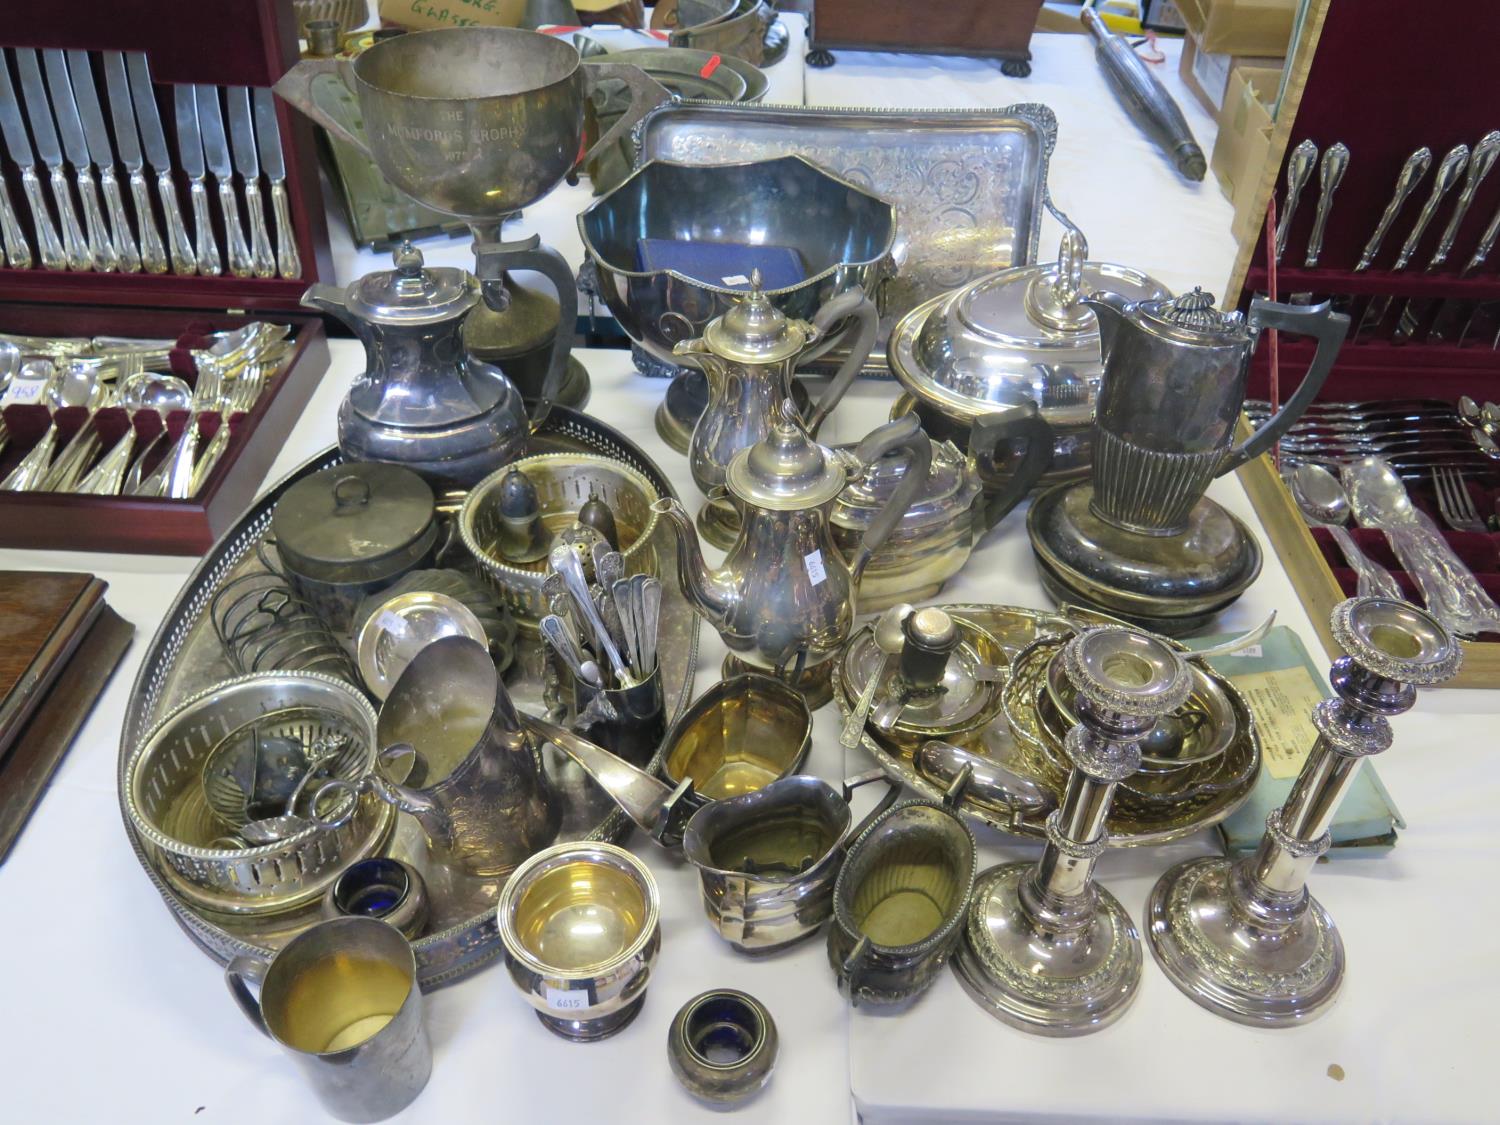 A Large Selection Of Silver Plated Ware Including Tray, Coffee Pots, Tea Pots Etc.